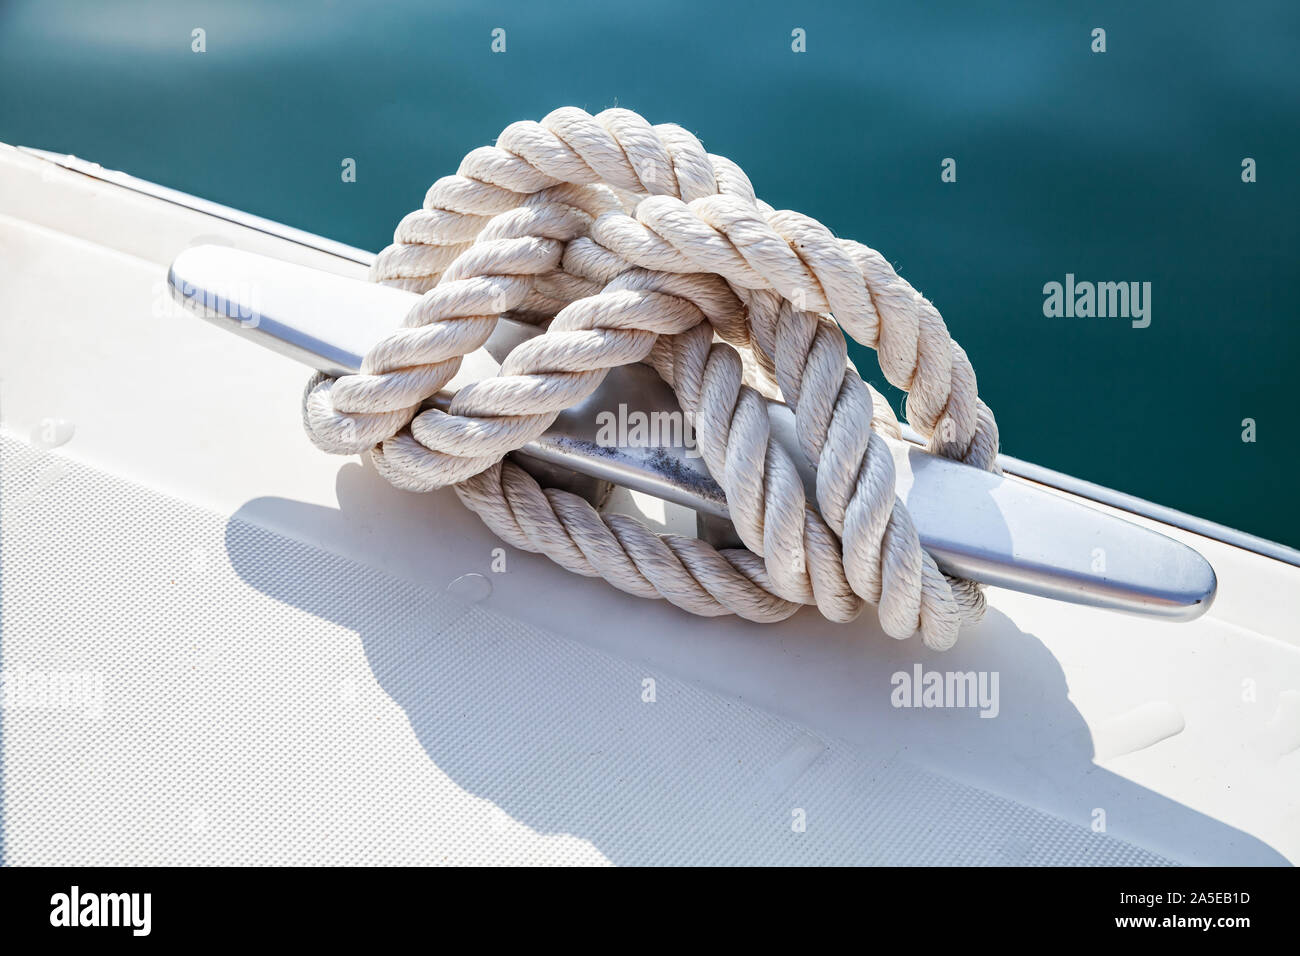 https://c8.alamy.com/comp/2A5EB1D/stainless-steel-boat-mooring-cleat-with-knotted-rope-mounted-on-white-yacht-deck-2A5EB1D.jpg